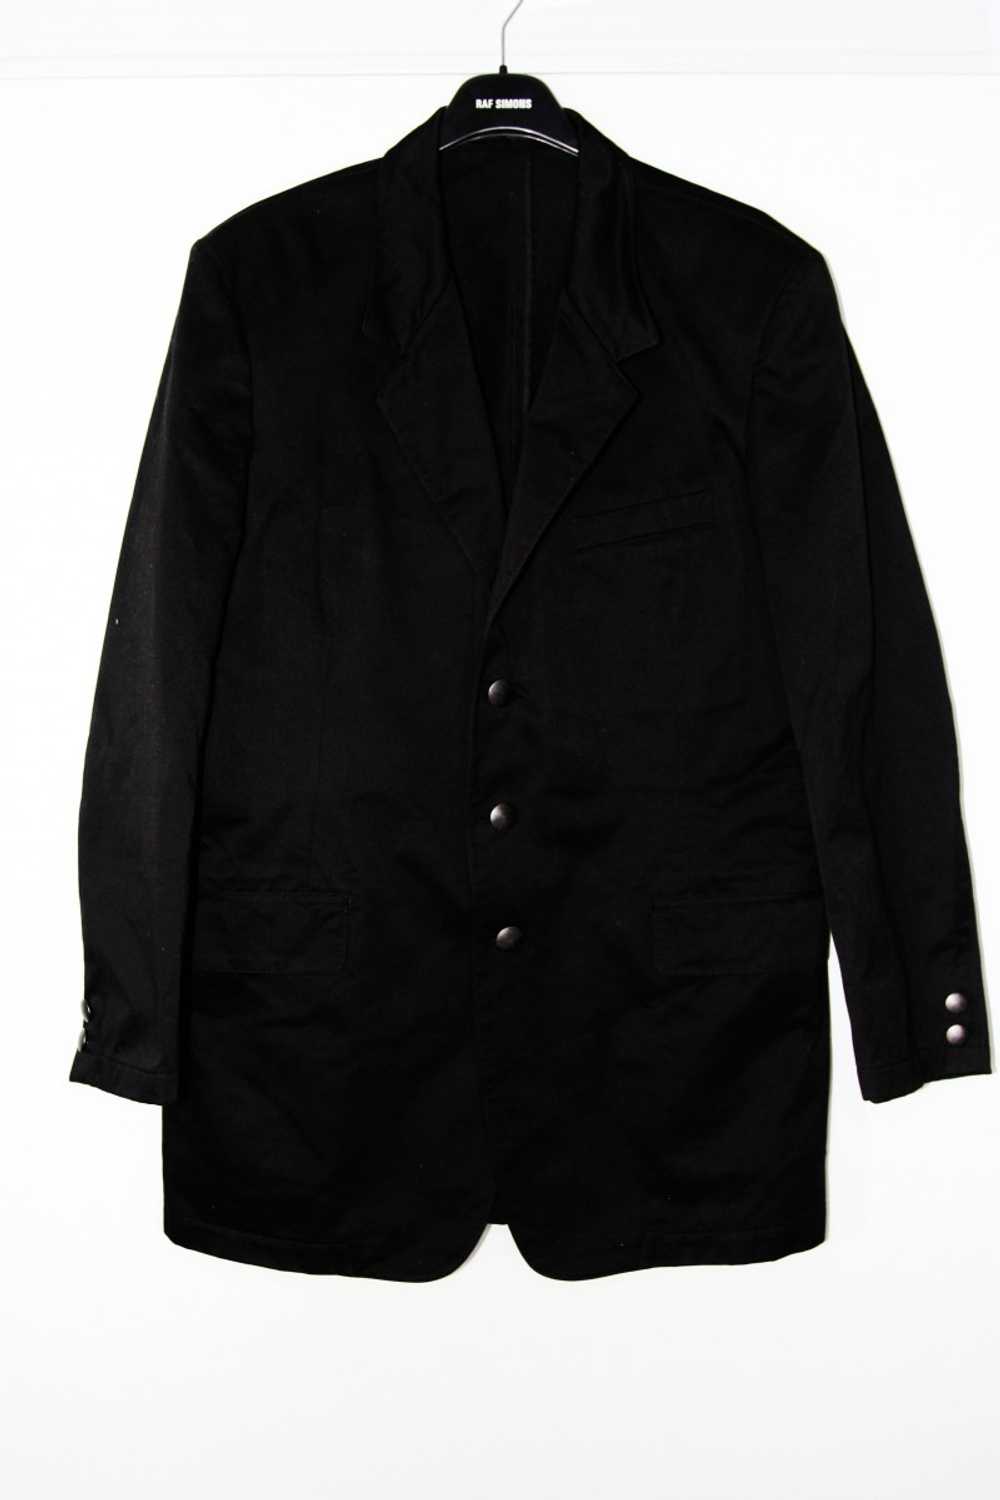 SS03 YOHJI YAMAMOTO POUR HOMME EMBROIDERED FLOWER… - image 2